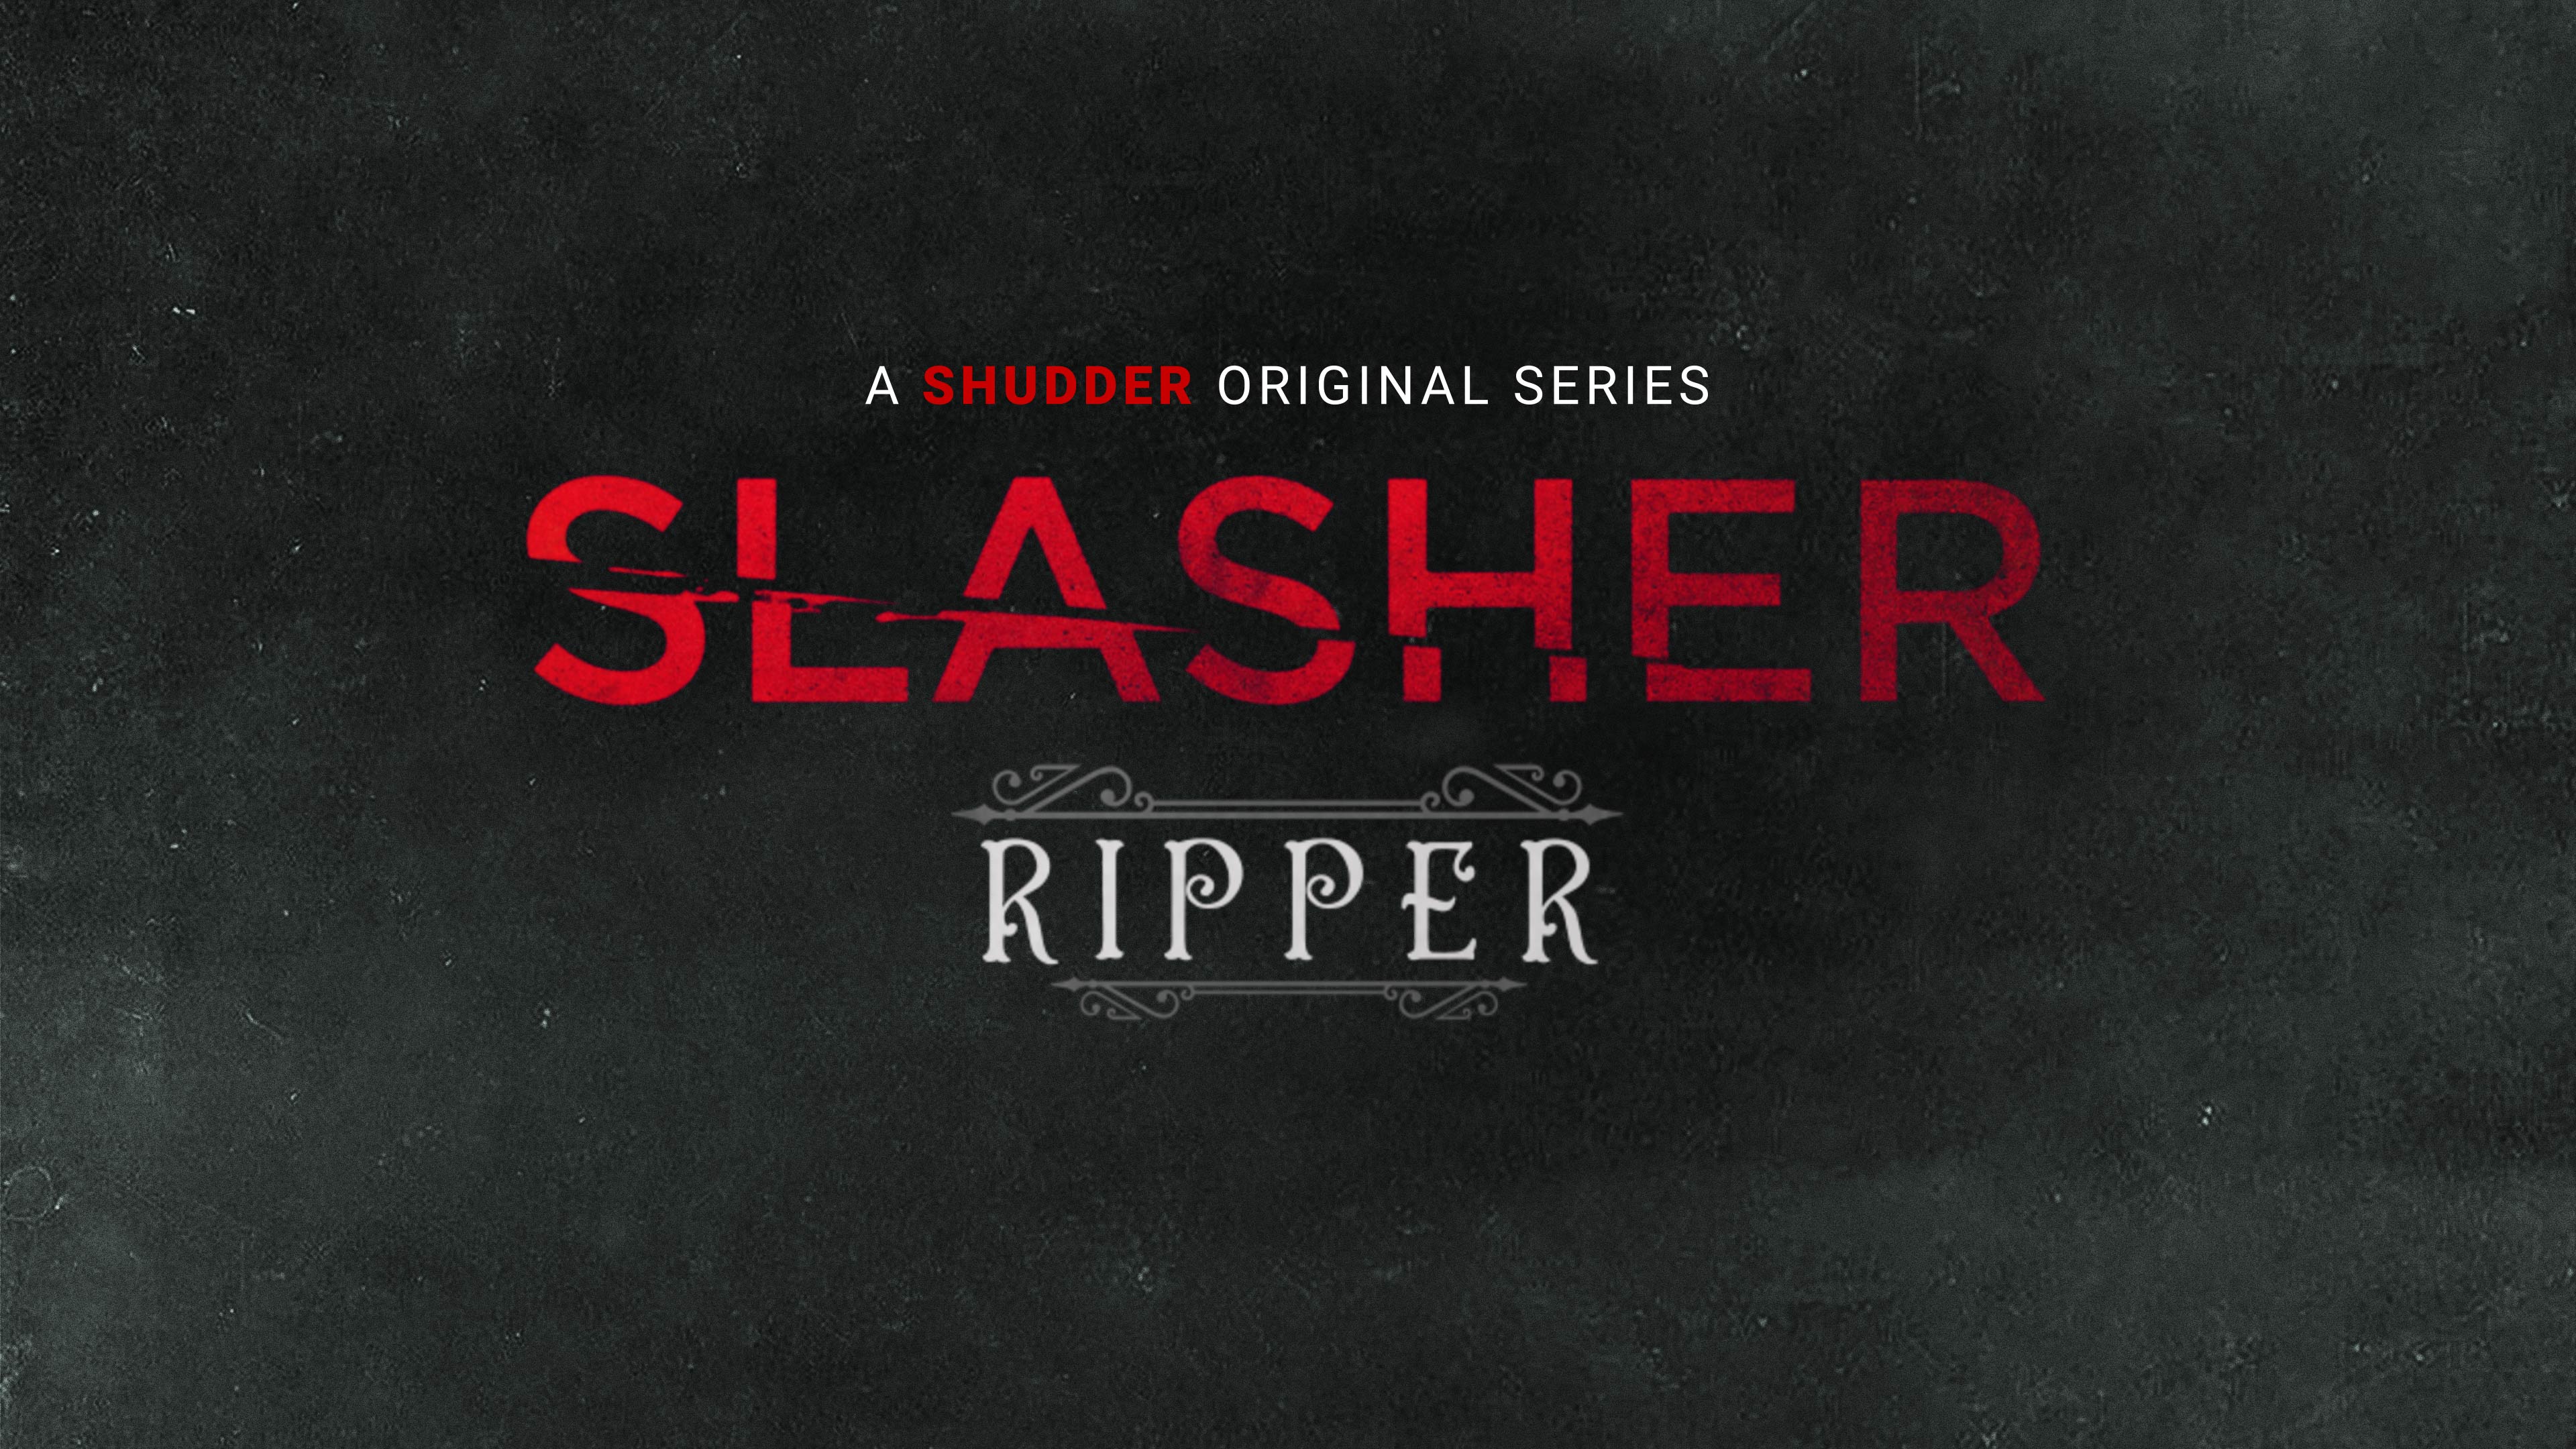 Slasher: Ripper Trailer, Slasher: Ripper takes the franchise back in time to the 19th century. There's a killer stalking the mean streets, but instead of targeting the poor and downtrodden like Jack the Ripper, The Widow is meeting out justice against the rich and powerful. 